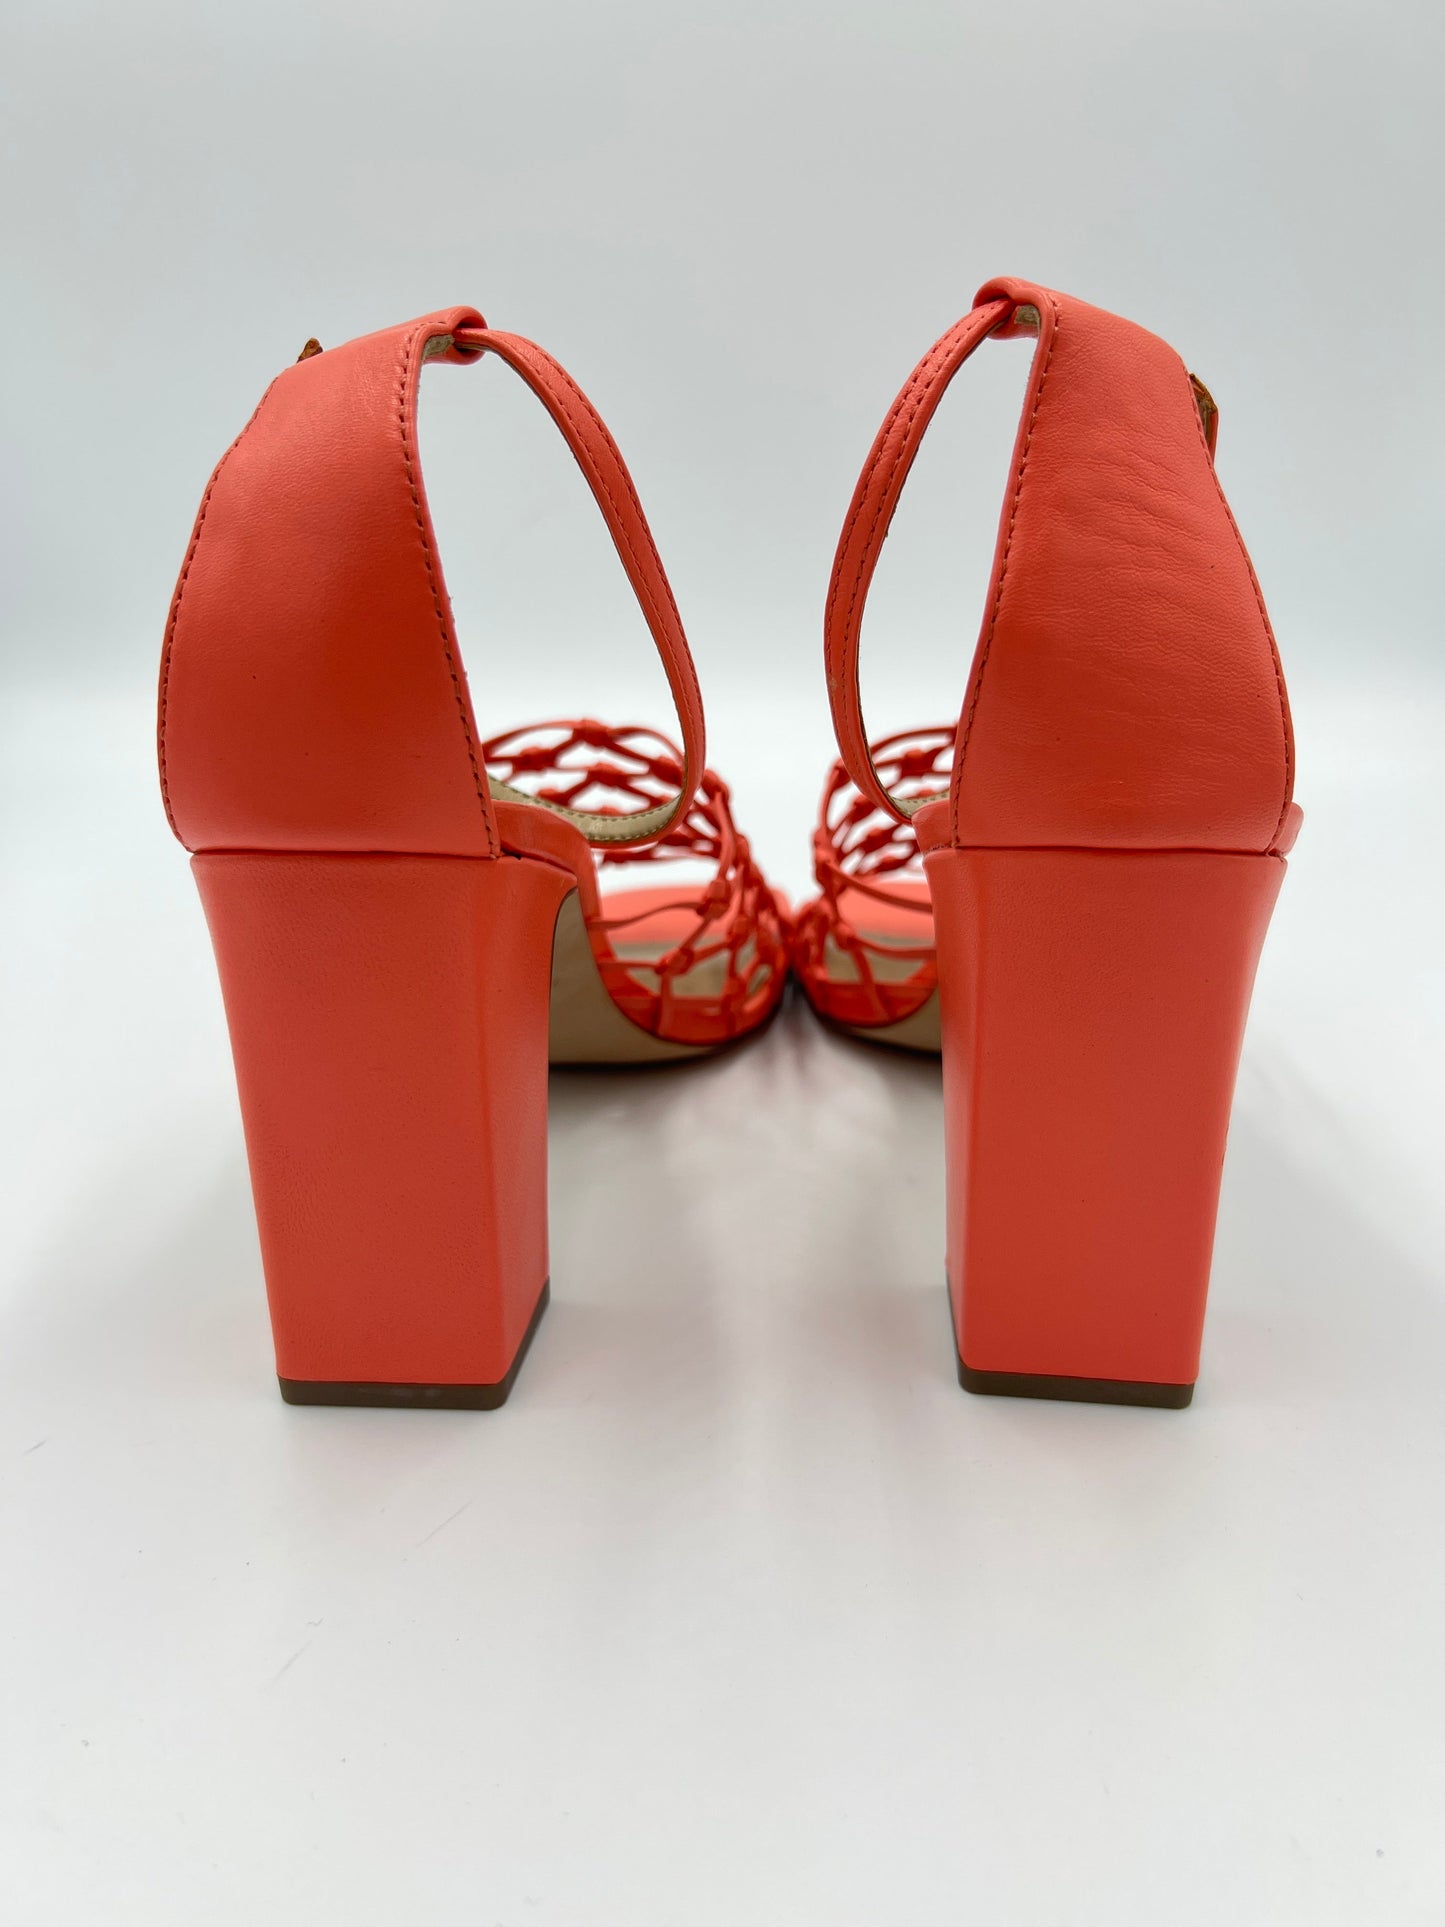 NEW! Shoes Heels Block Ann Taylor, Size 10